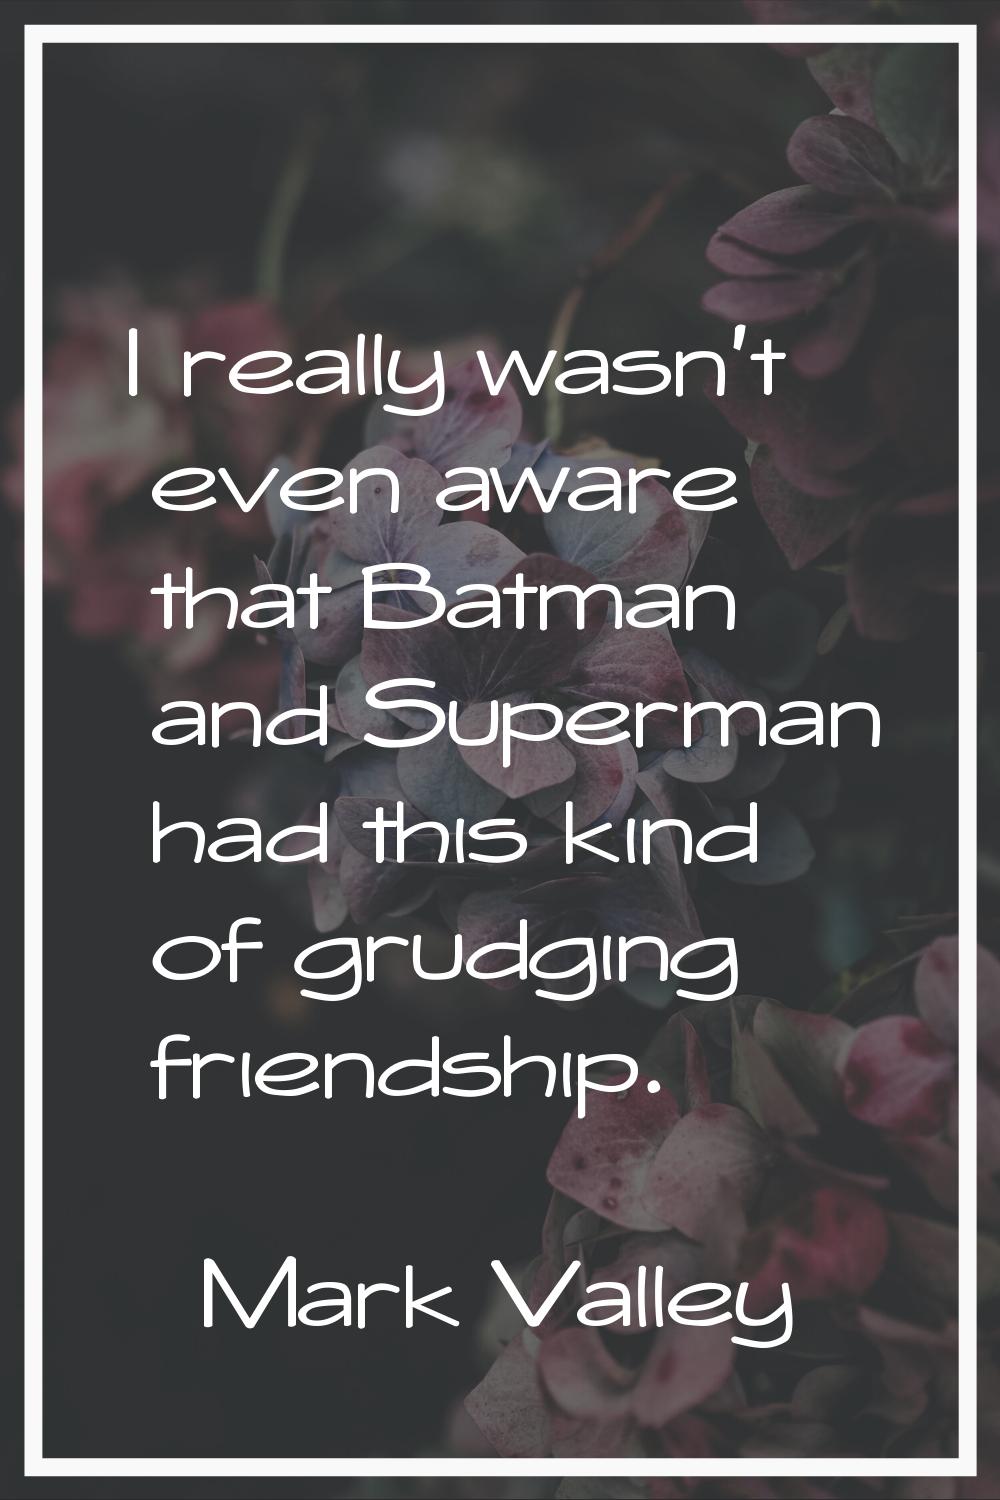 I really wasn't even aware that Batman and Superman had this kind of grudging friendship.